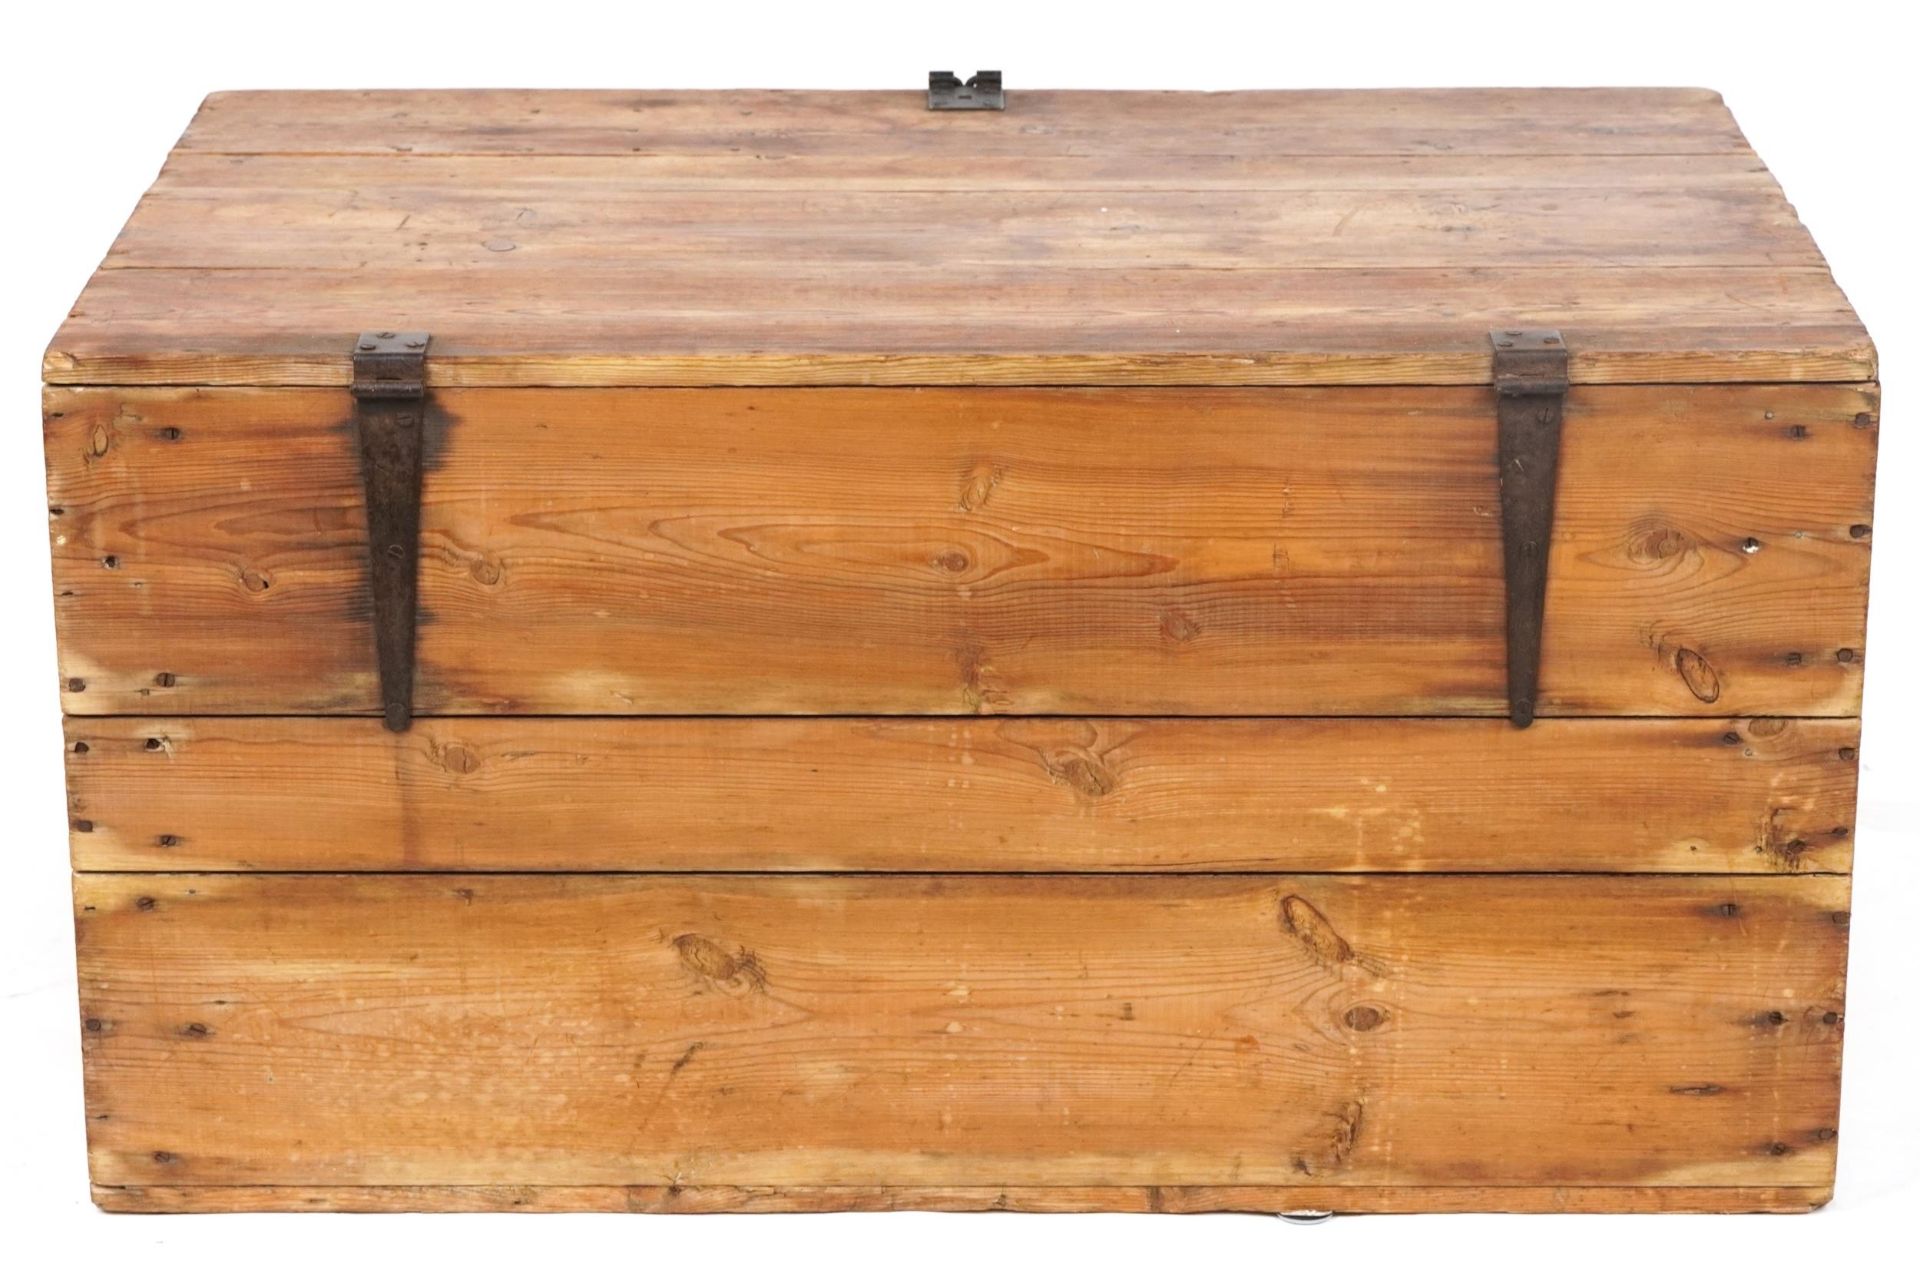 Large Victorian style waxed pine trunk with carrying handles, 46.5cm H x 91.5cm W x 60.5 D : For - Image 5 of 5